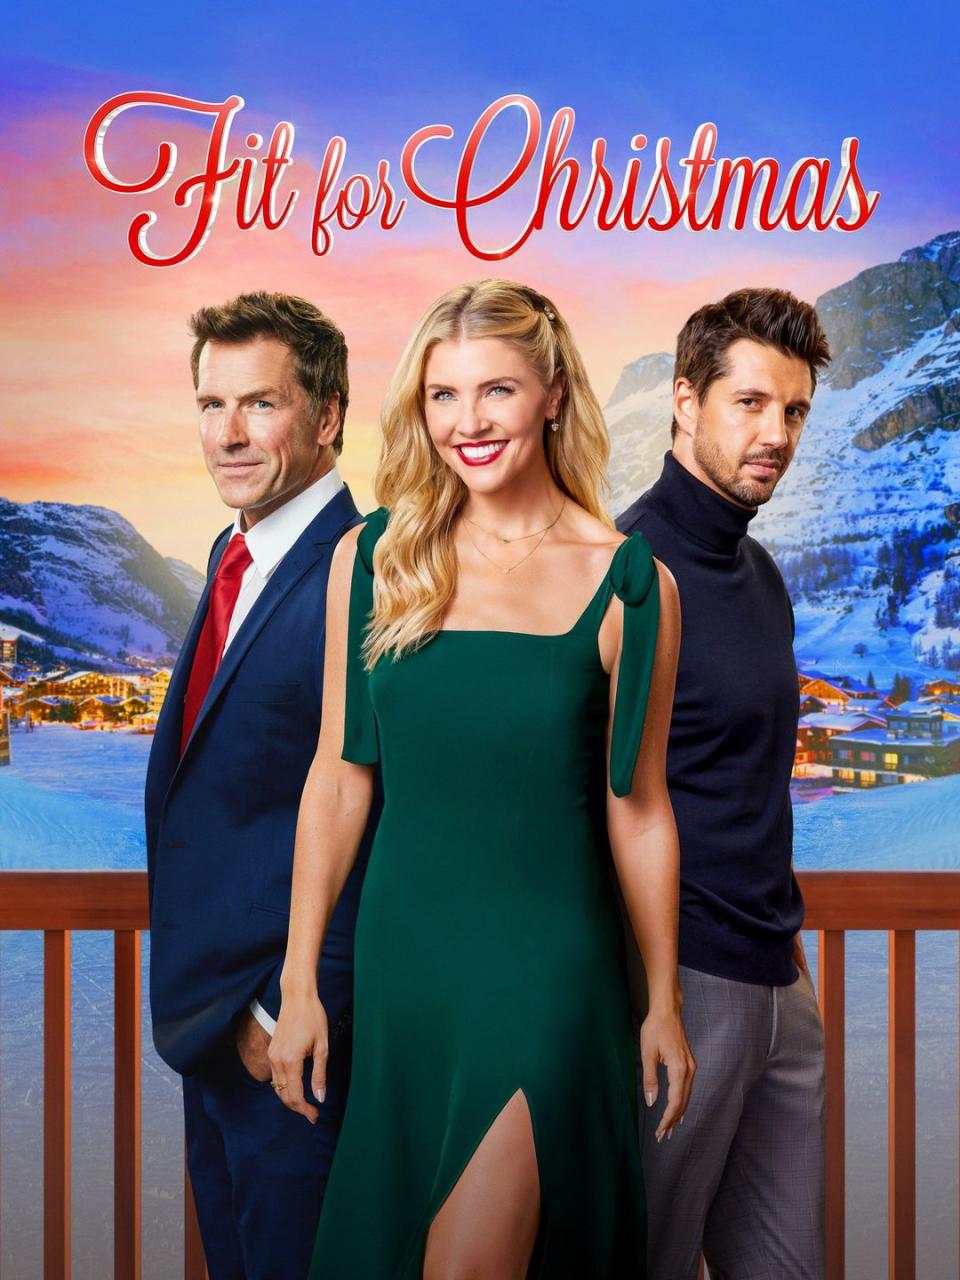 <p>A Christmas-obsessed fitness instructor falls in love with an elusive business developer. Their relationship soon creates complications to his plans to replace the local community center with his next project.</p><p><a class="link " href="https://go.redirectingat.com?id=74968X1596630&url=https%3A%2F%2Fwww.paramountplus.com%2Fshows%2Ffit-for-christmas%2F&sref=https%3A%2F%2Fwww.countryliving.com%2Flife%2Fentertainment%2Fg42171006%2Fbest-christmas-movies-on-paramount-plus%2F" rel="nofollow noopener" target="_blank" data-ylk="slk:Shop Now">Shop Now</a></p>